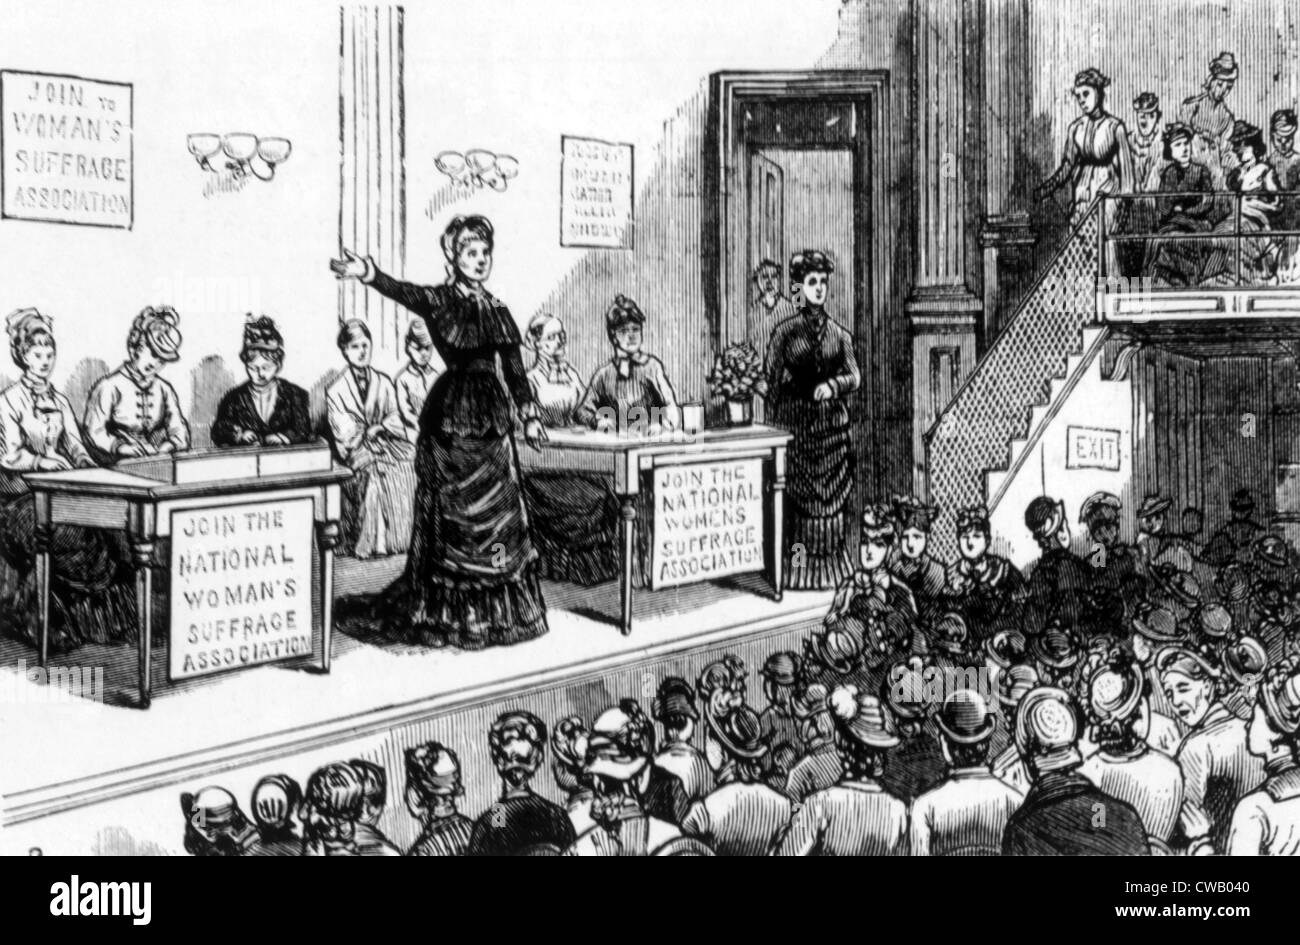 The National Women's Suffrage Association organizers speaking at a political meeting, c. 1872. Stock Photo